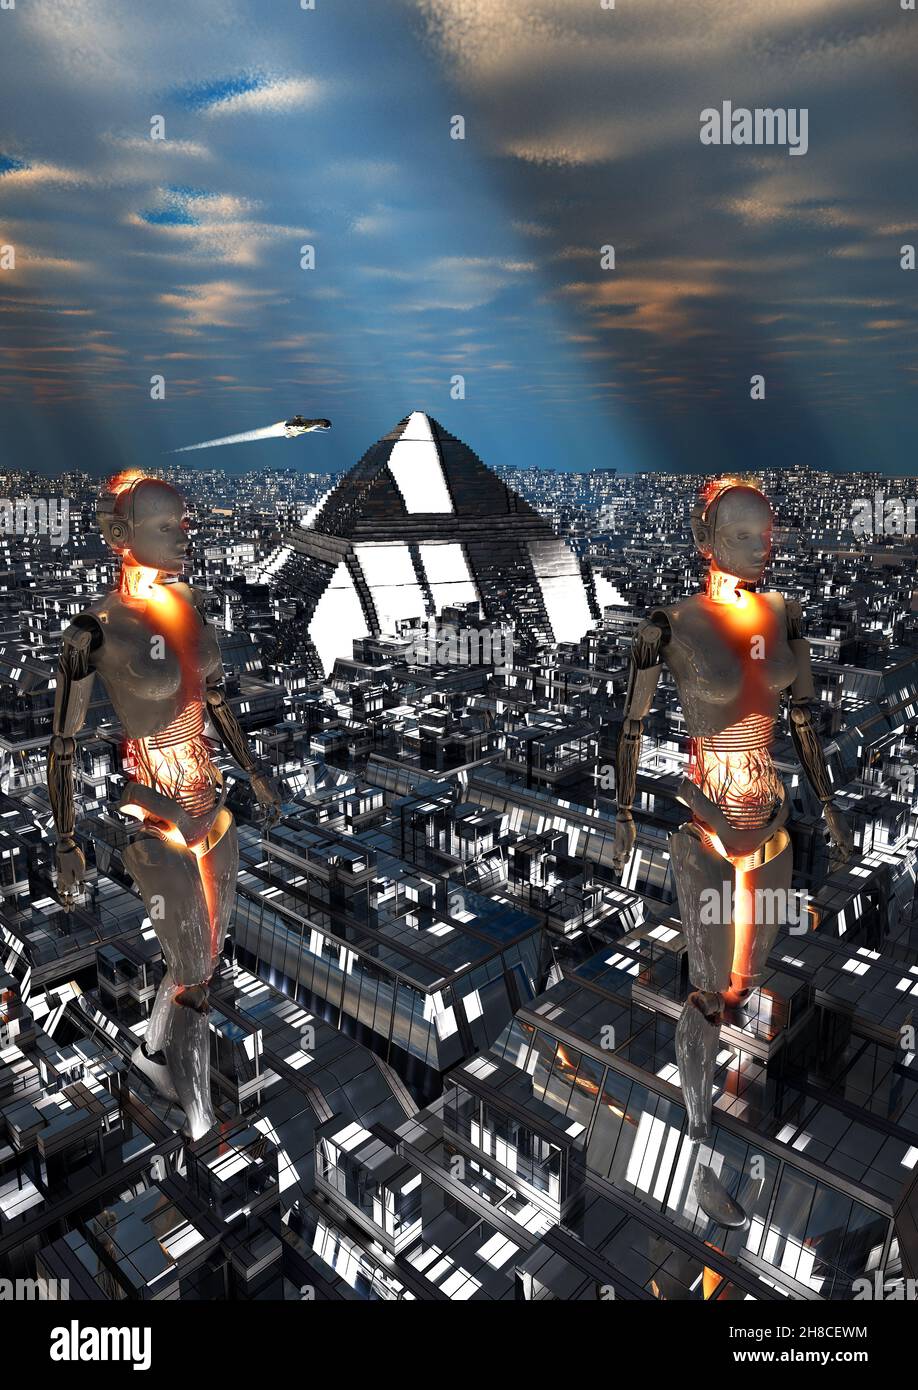 Pyramid City Run By Androids Stock Photo